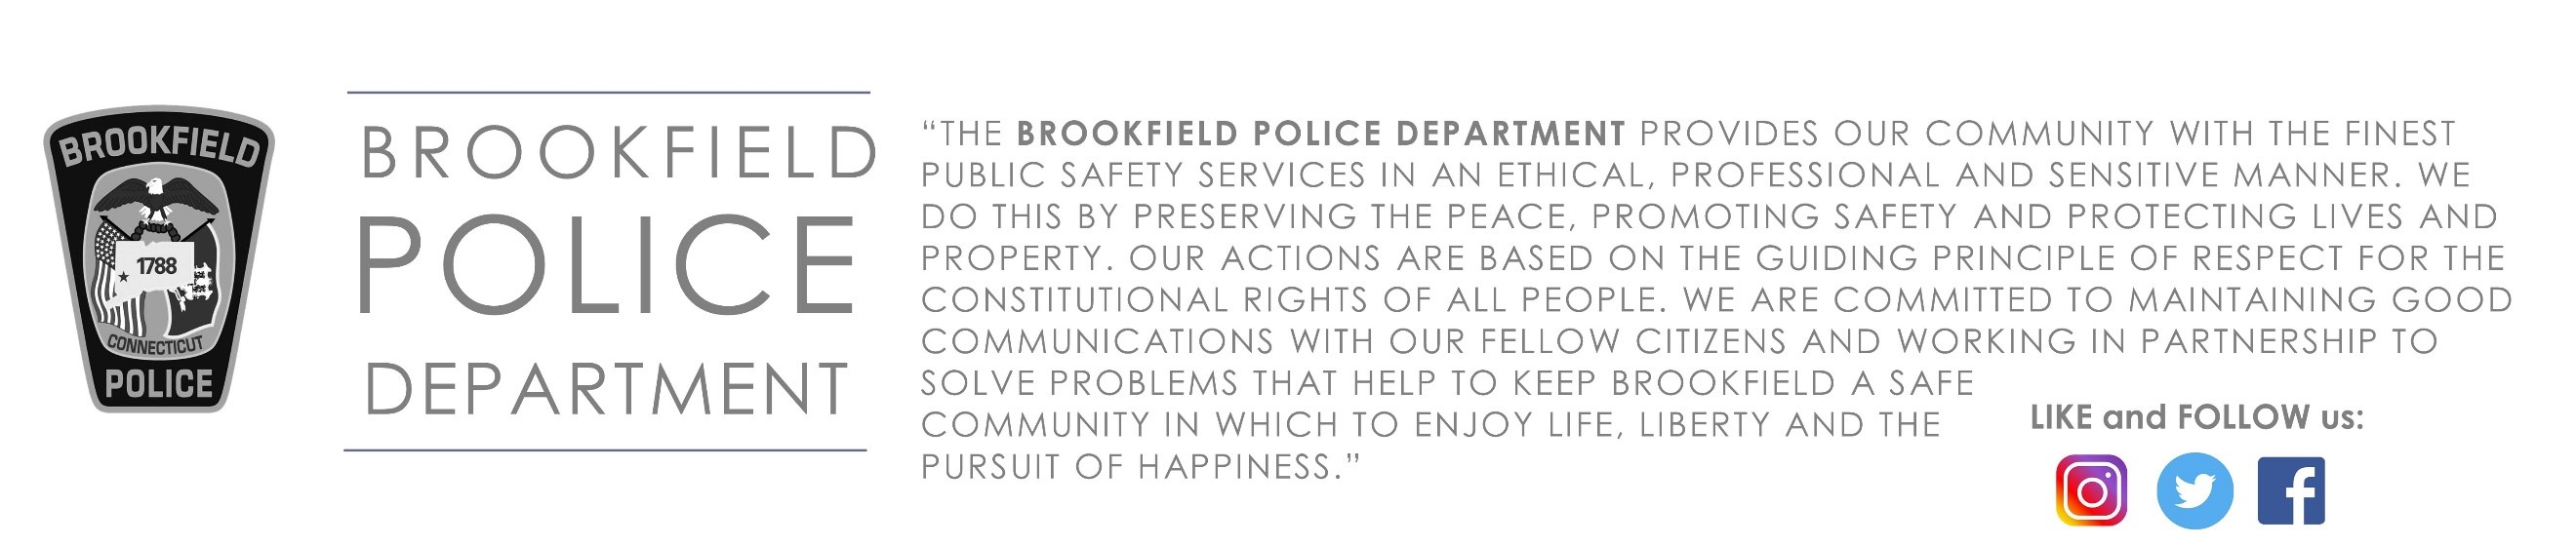 Brookfield Police Department, CT Police Jobs